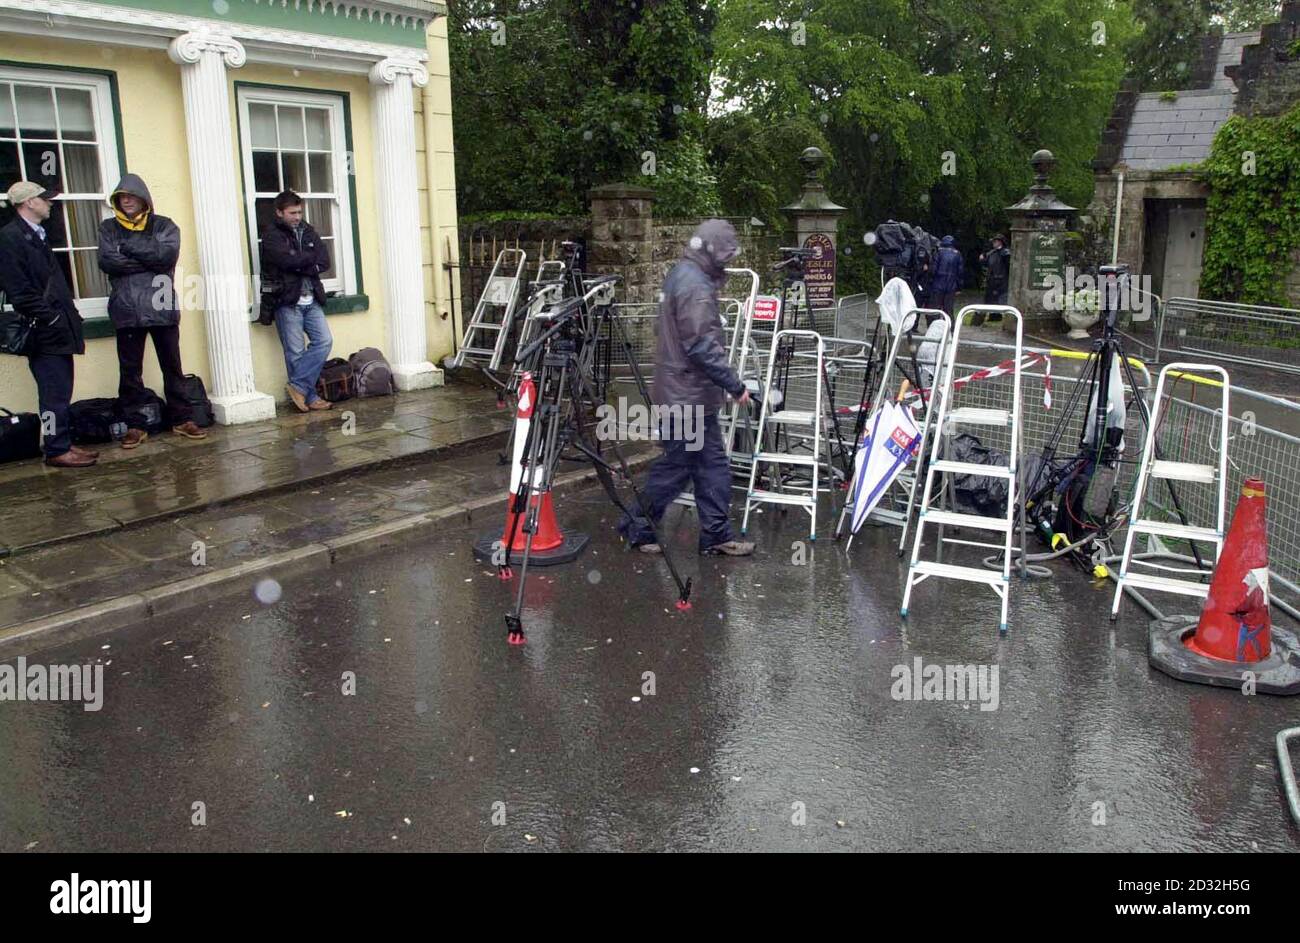 Media from around the world wait, in the rain ouitside Castle Leslie, Glaslough, in County Monaghan, Rep. of Ireland, where former Beatle Paul McCartney is  marrying Heather Mills. Stock Photo